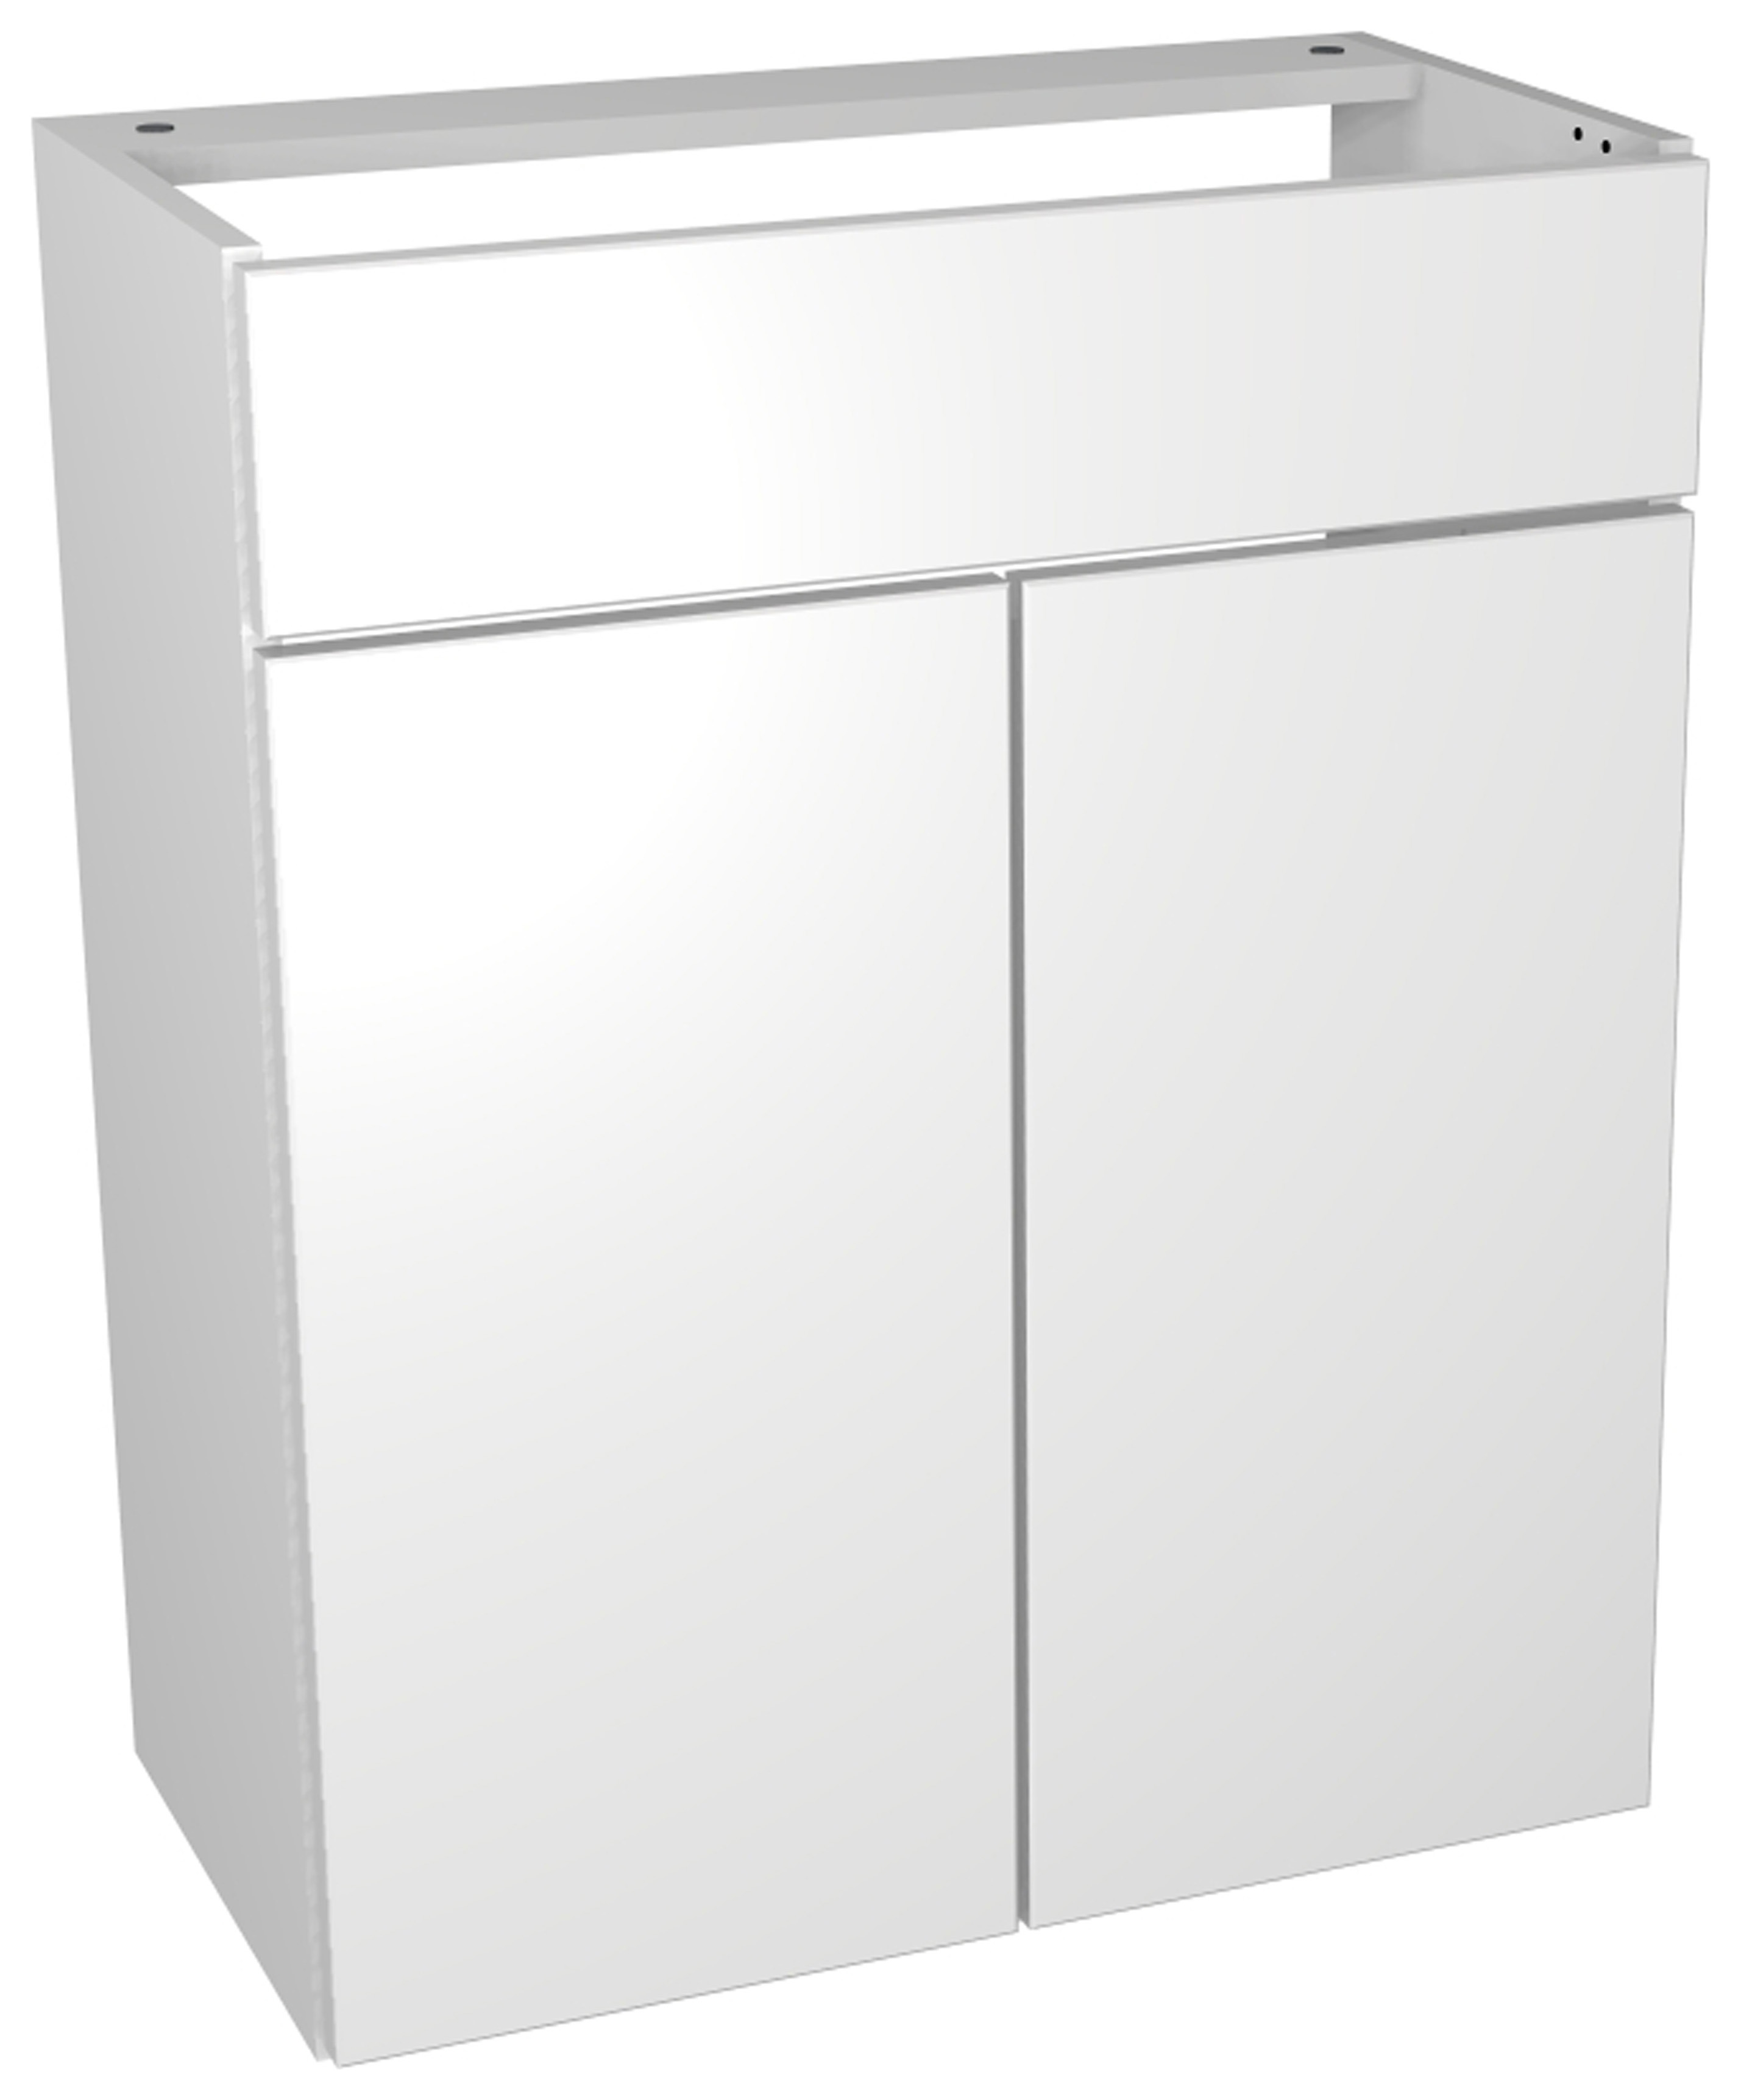 Image of Wickes Vienna Modern Vanity Unit, in White, Size: 600x735mm